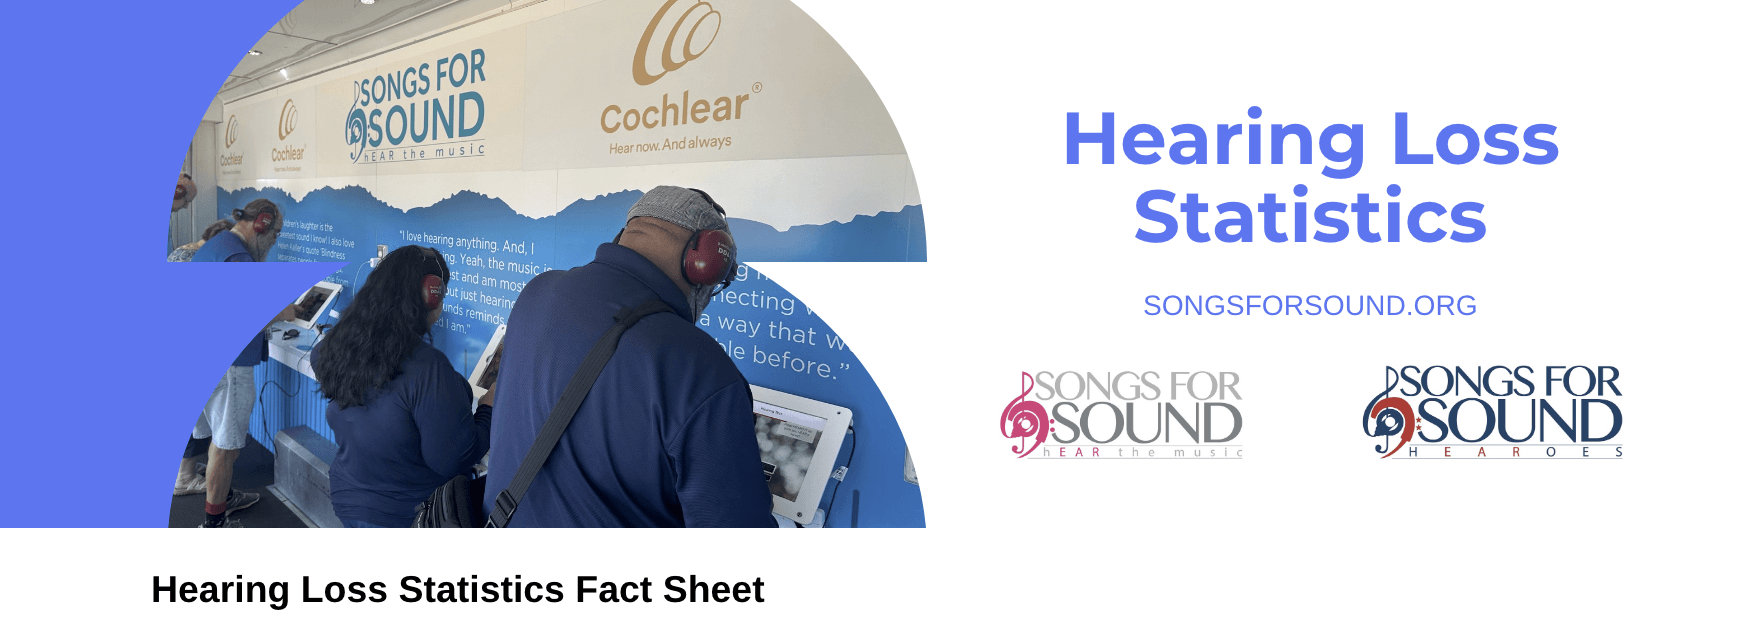 FREE DOWNLOAD: Fact Sheet About Hearing Loss